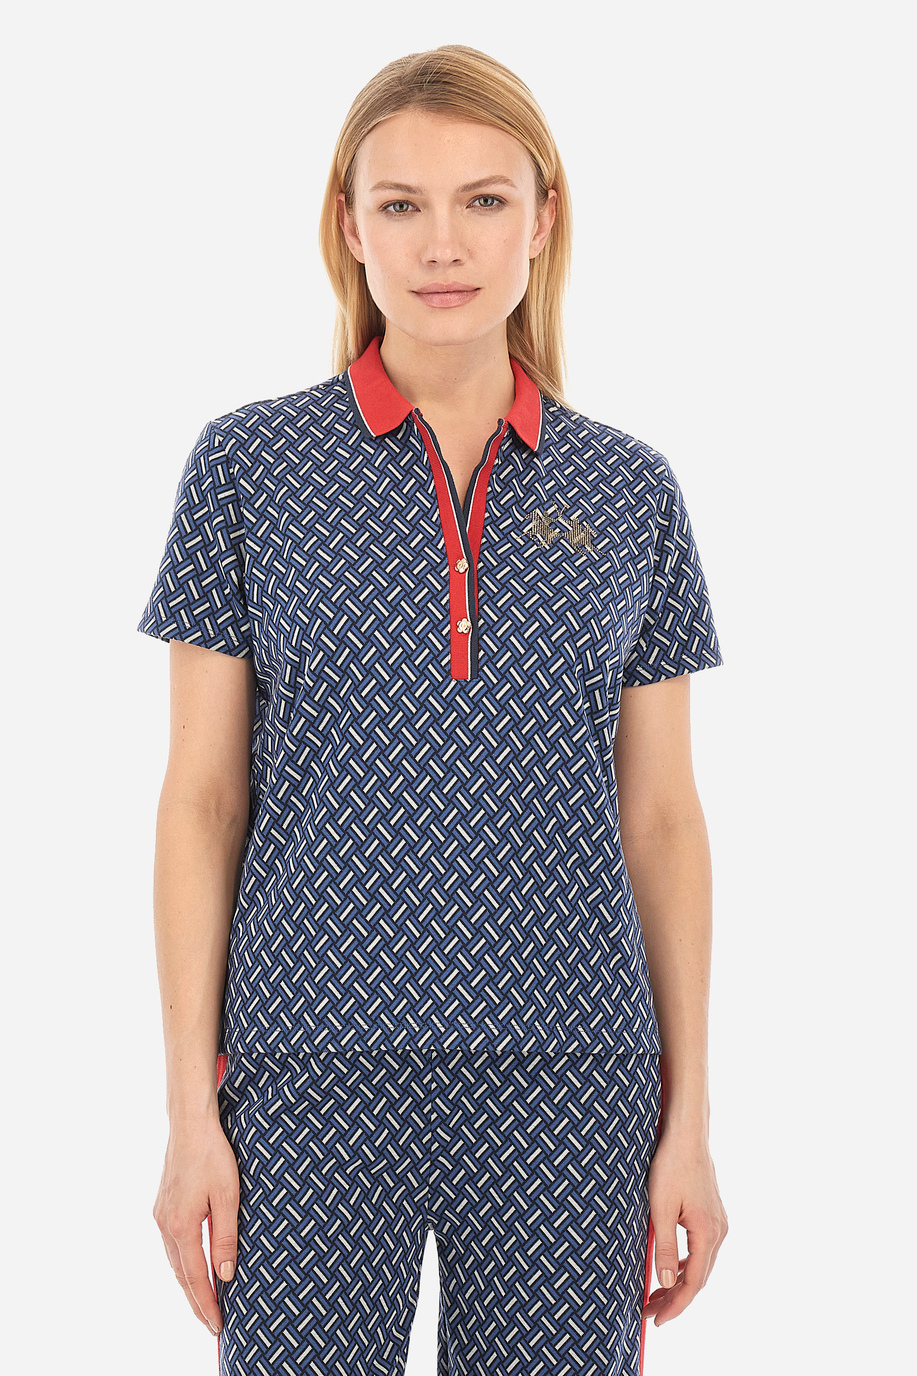 Women's polo shirt in a regular fit - Whitny - Polo Shirts | La Martina - Official Online Shop